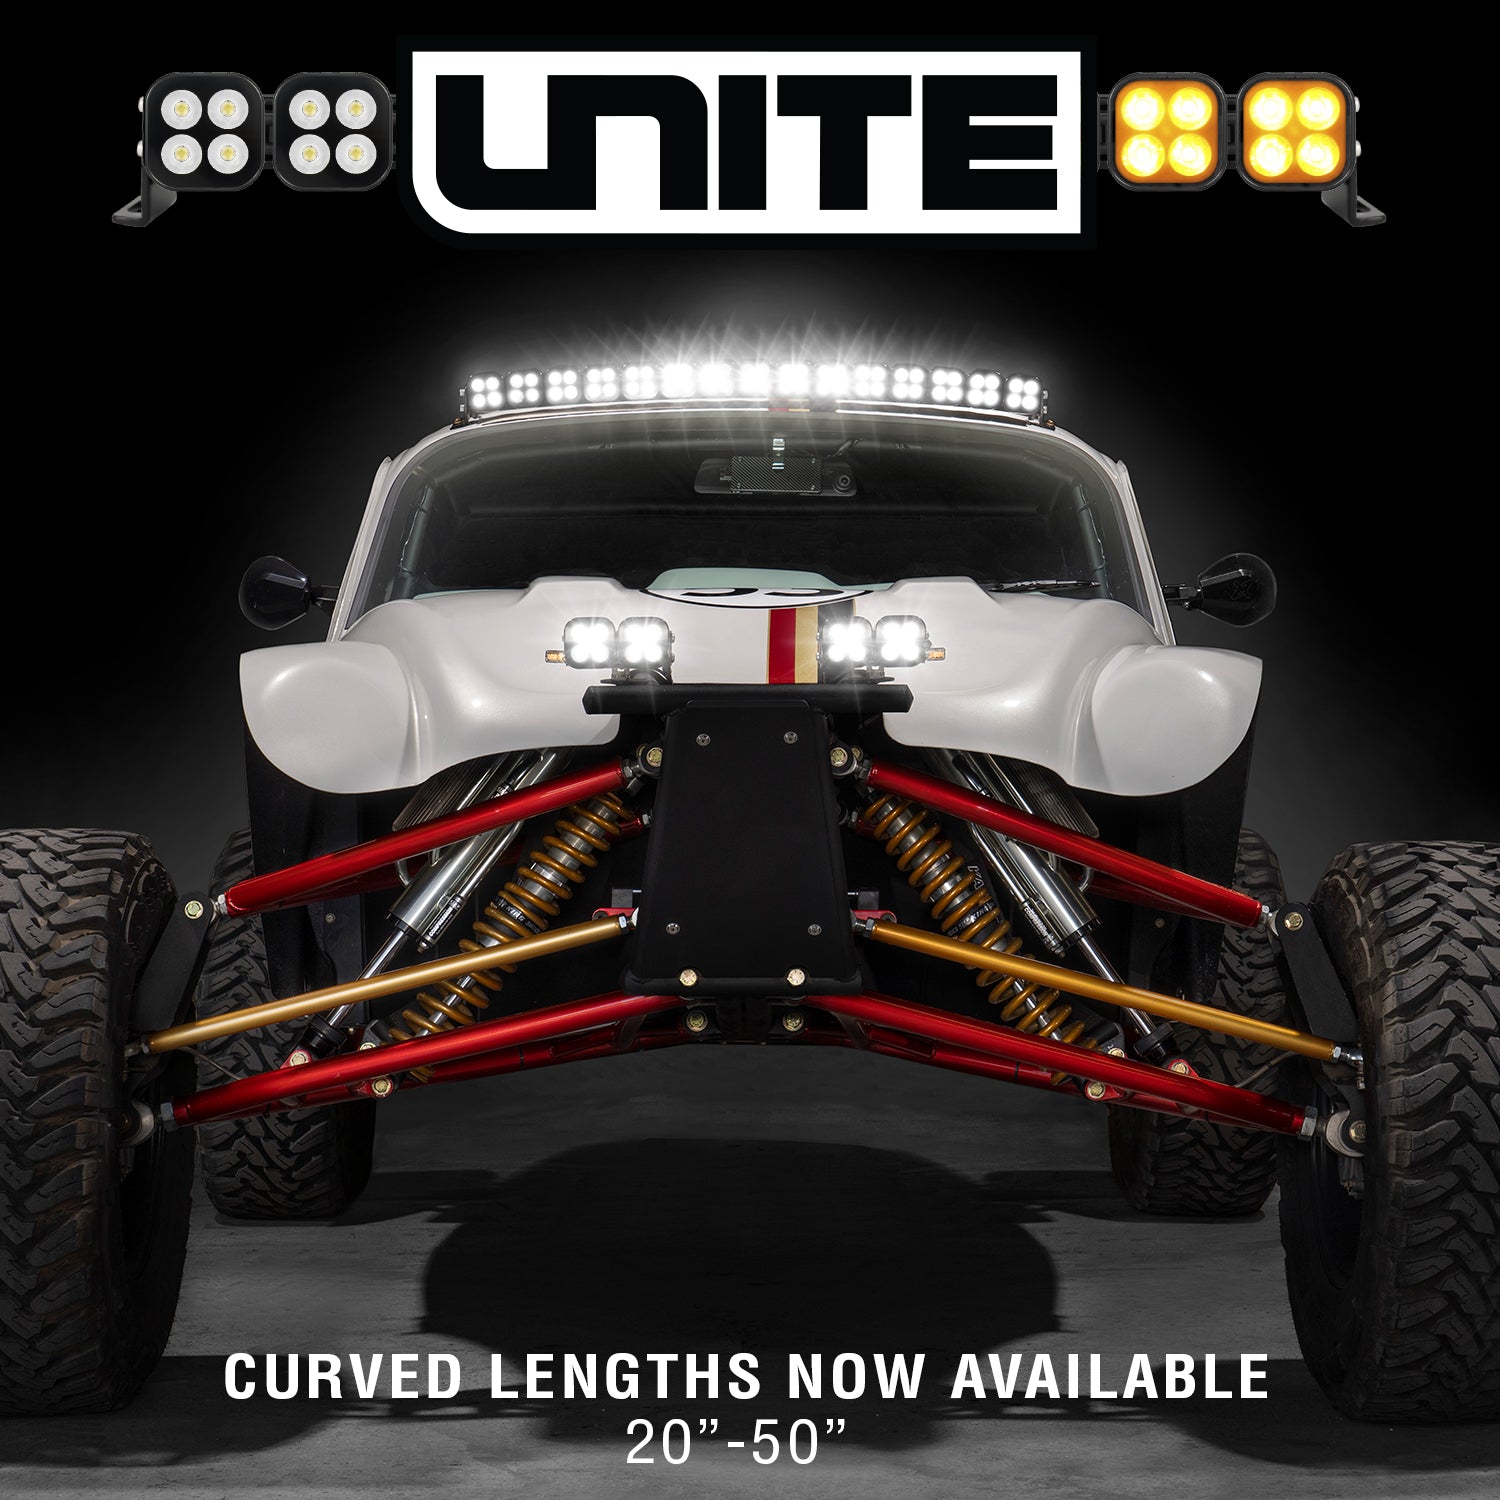 UNITE LED Light Bar Now With Curved Rails